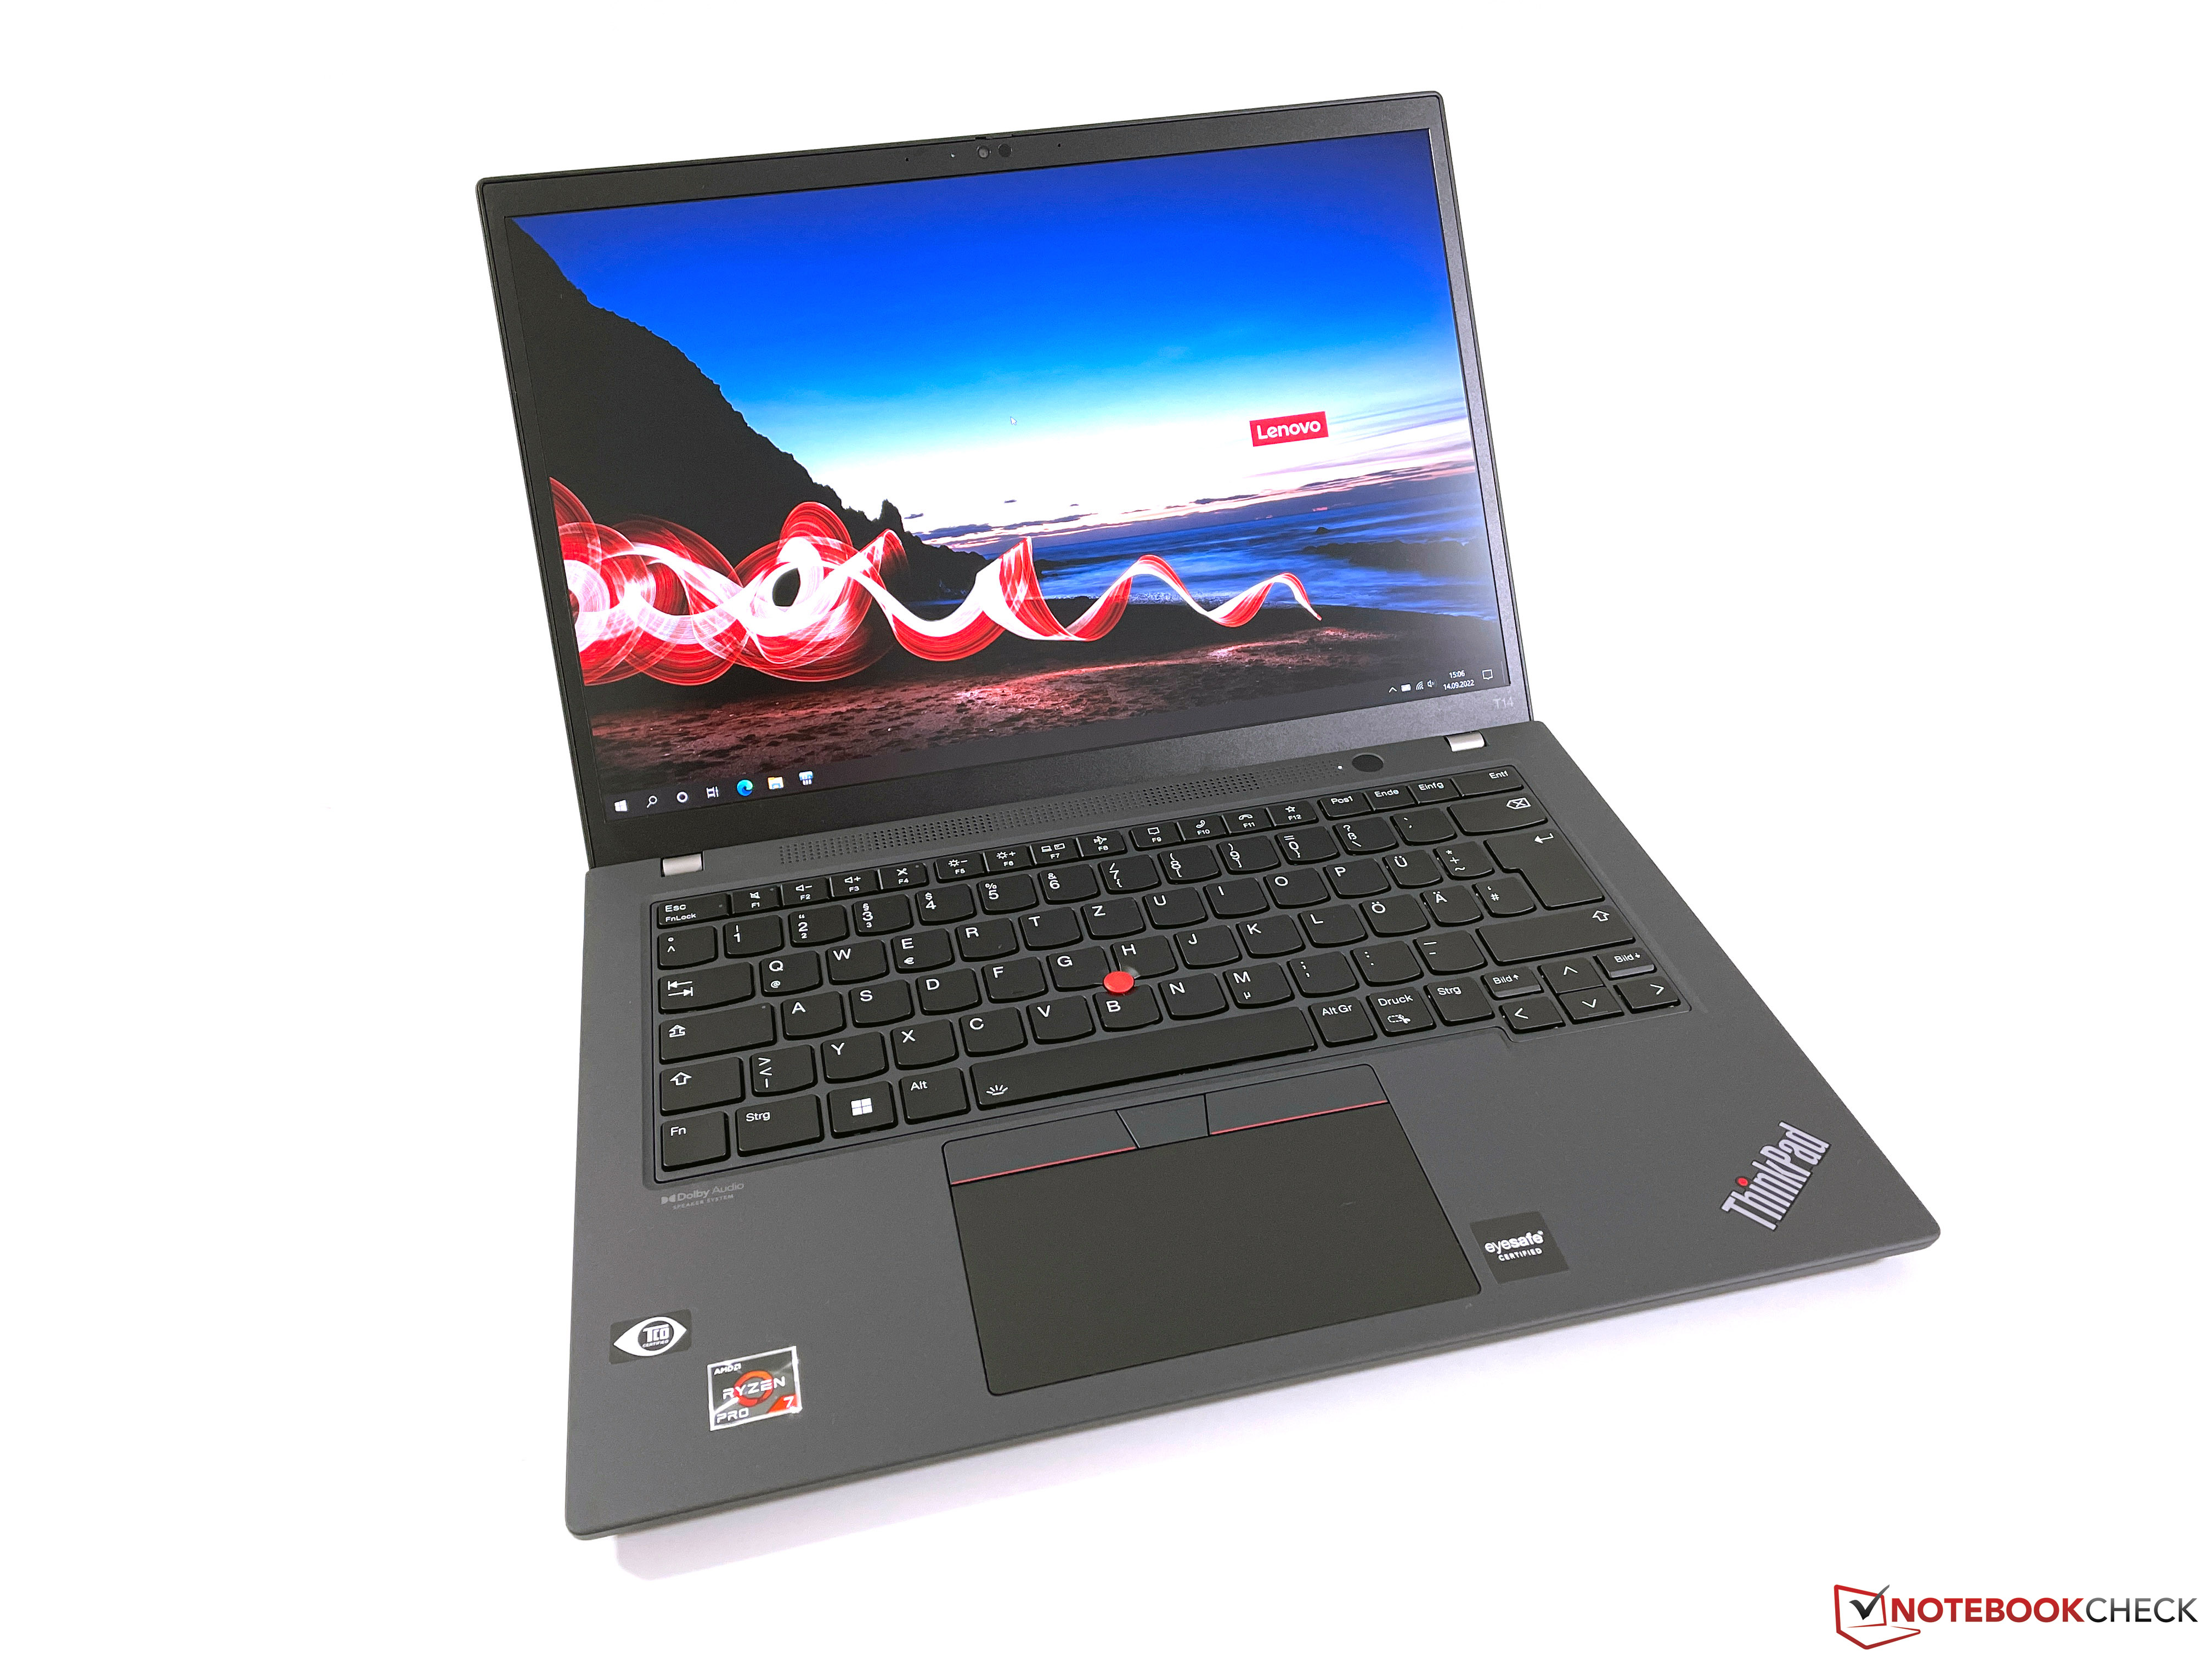 Lenovo ThinkPad T14 G3 review: Business laptop is better with AMD Ryzen Pro   Reviews